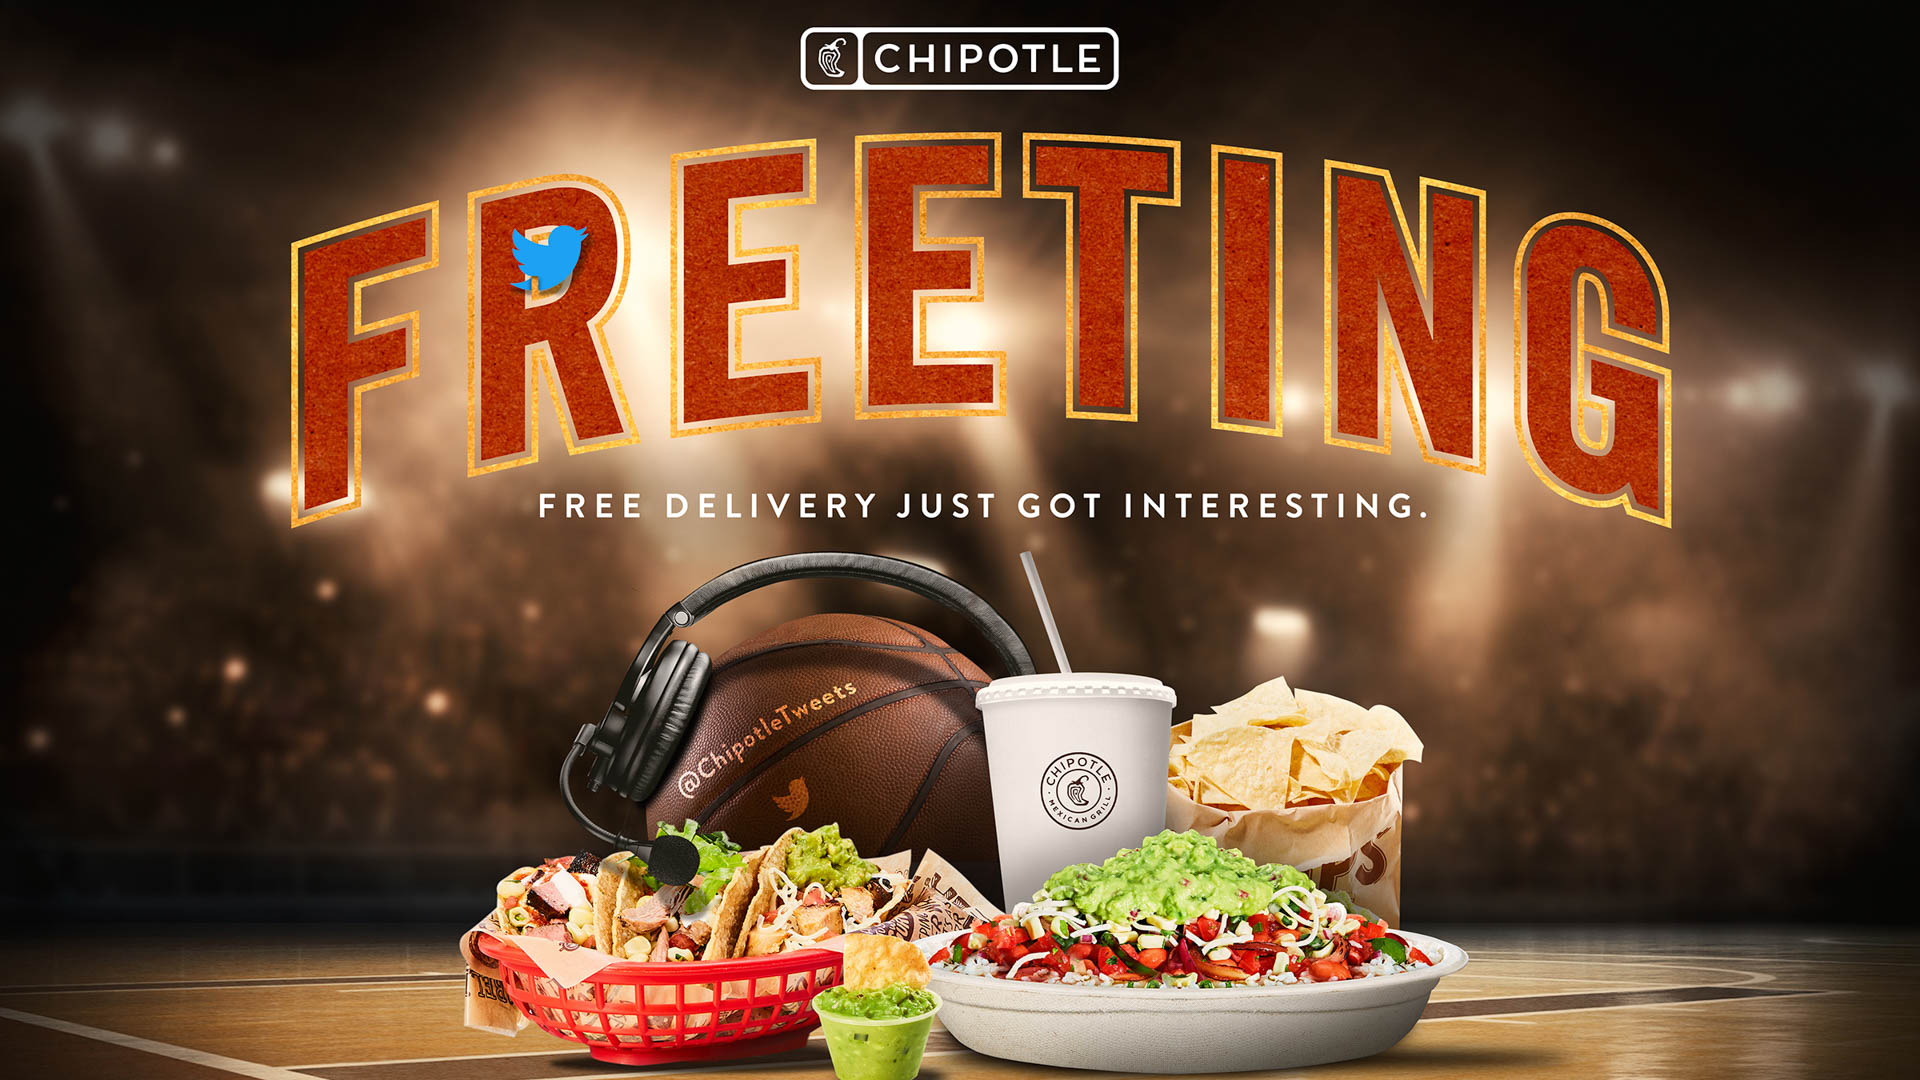 Chipotle Freeting Wins the Pro Basketball Finals